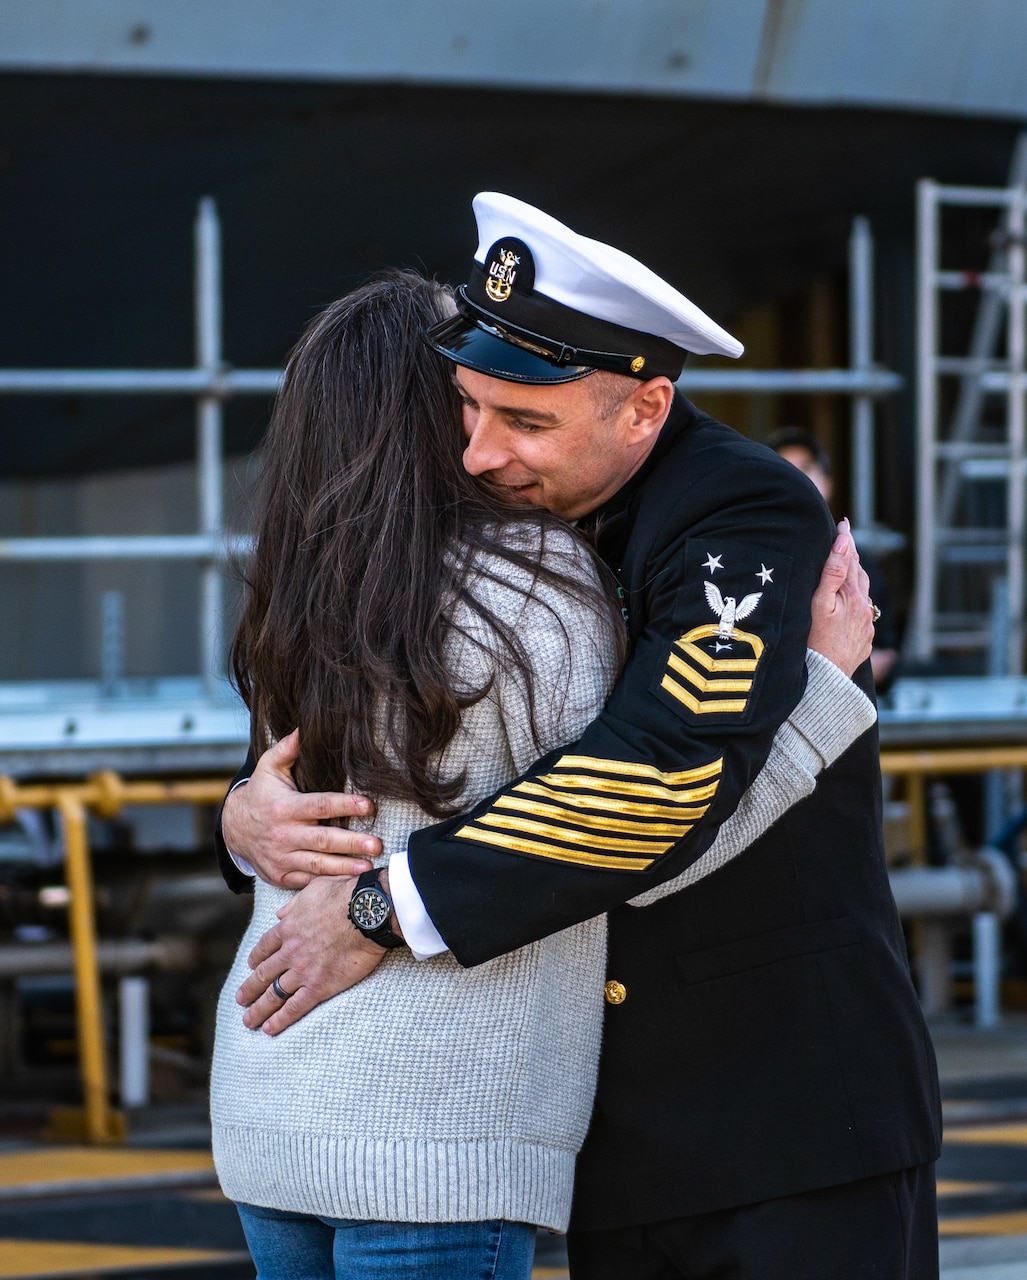 YOKOSUKA, Japan (Nov. 19, 2023) Command Master Chief Jeremy Douglas, command master chief of the U.S. Navy’s only forward-deployed aircraft carrier, USS Ronald Reagan (CVN 76), hugs his wife on the pier as the ship returns to Commander, Fleet Activities Yokosuka, Japan, following a six-month deployment in the Indo-Pacific region, Nov. 19. During Ronald Reagan’s deployment, the ship conducted multinational exercises with the Japan Maritime Self-Defense Force (JMSDF), Royal Australian Navy, Indonesian Navy, and Republic of Korea Navy, a multi-large deck event with USS Carl Vinson (CVN 70), Carrier Strike Group 1, and JMSDF first-in-class helicopter destroyer JS Hyuga (DDH 181), and visited Vietnam, Republic of Korea, and the Philippines. Ronald Reagan, the flagship of Carrier Strike Group 5, provides a combat-ready force that protects and defends the United States, and supports alliances, partnerships and collective maritime interests in the Indo-Pacific region. (U.S. Navy photo by Mass Communication Specialist 2nd Class Caroline H. Lui)